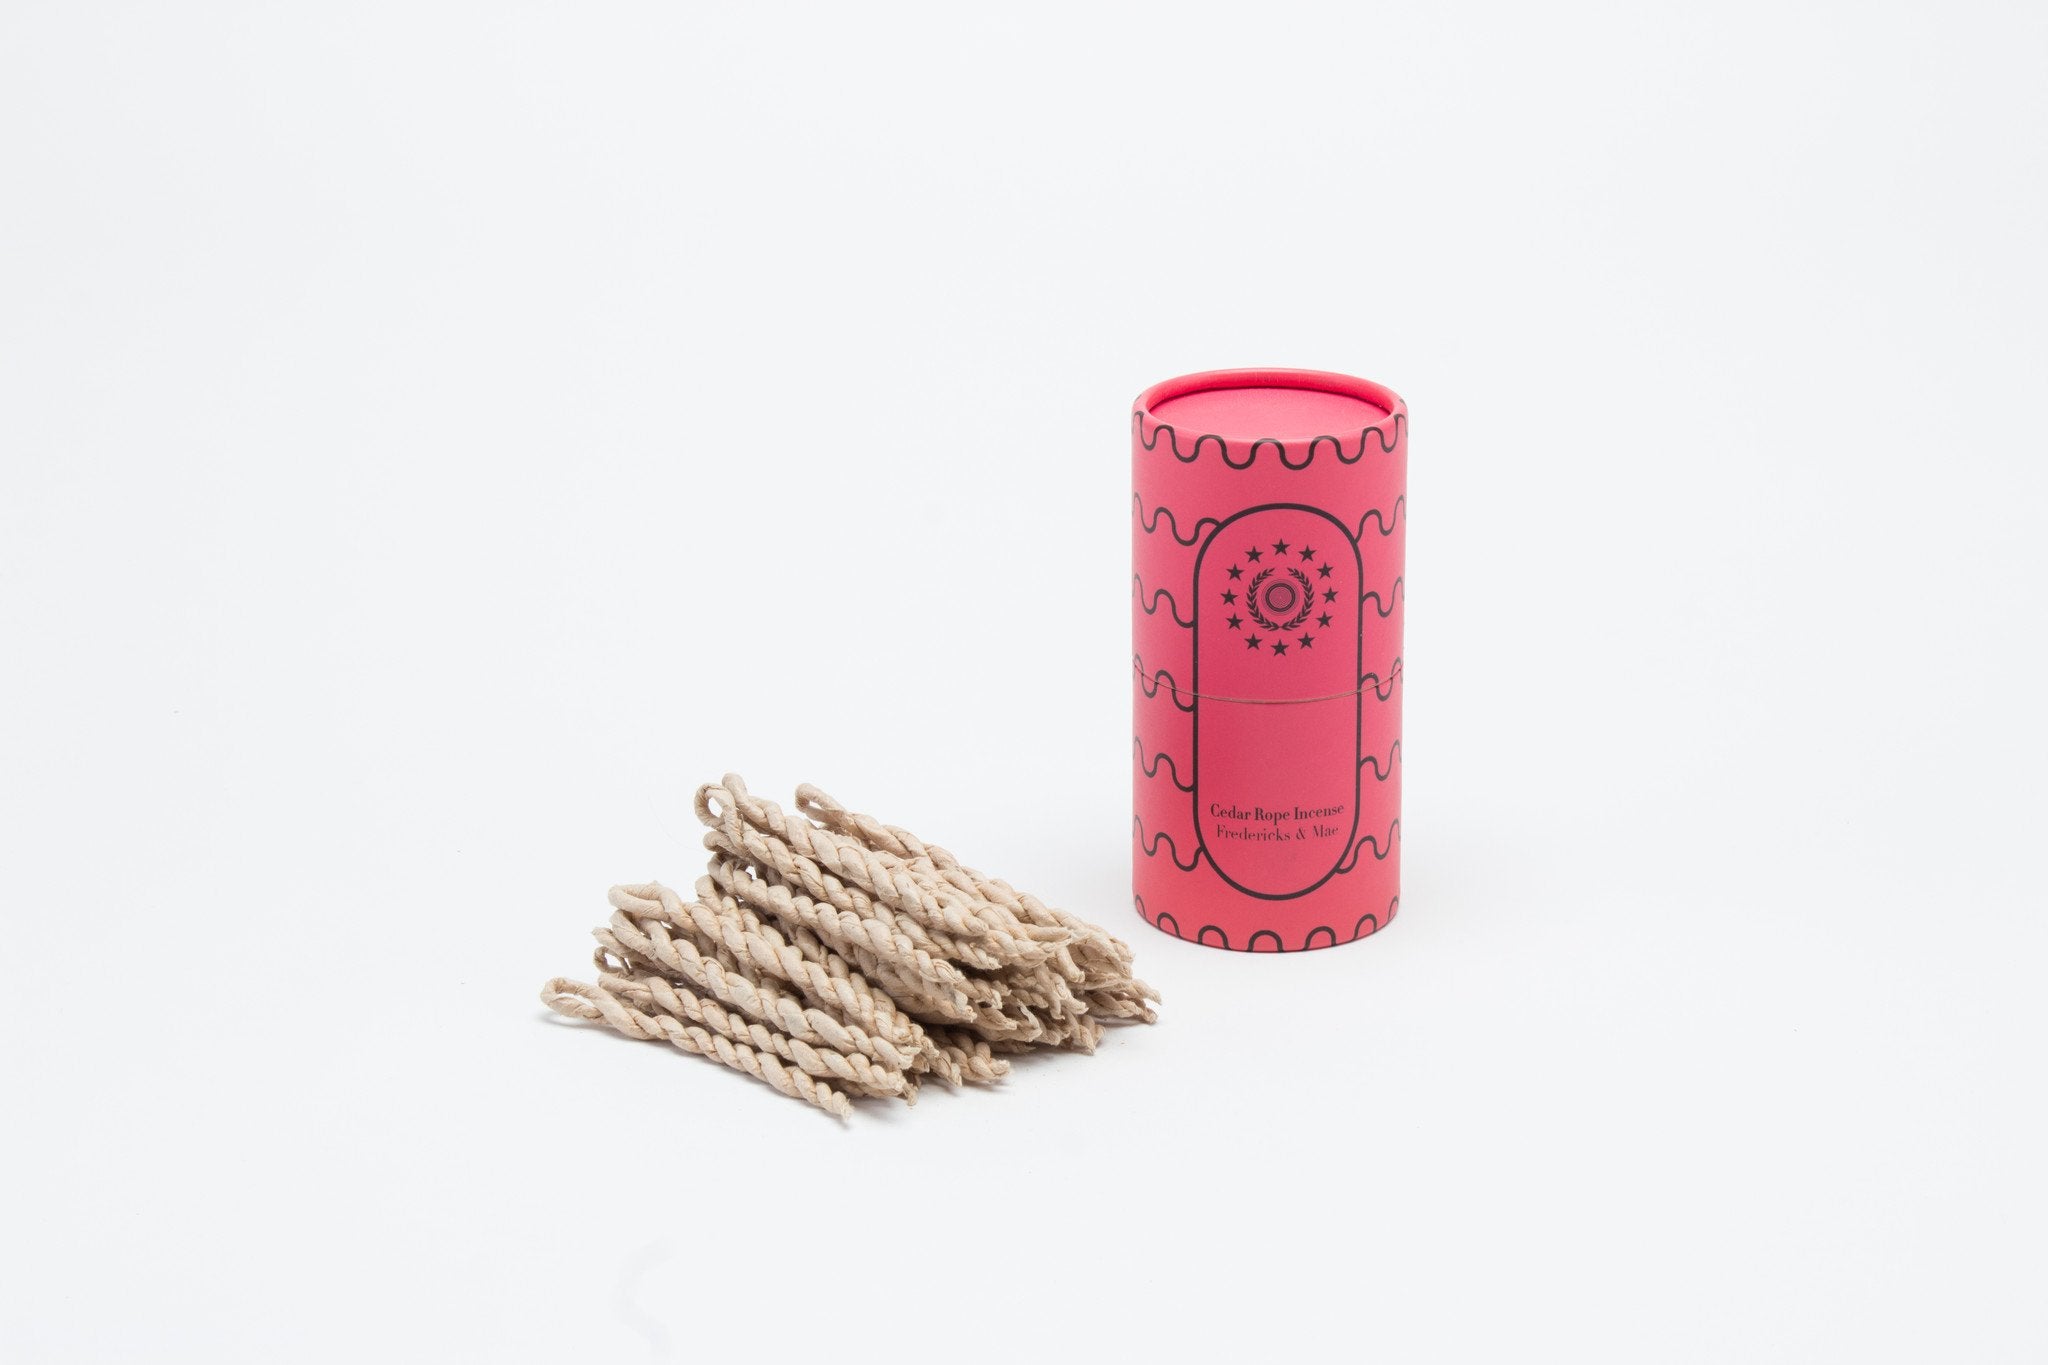 Fredericks and Mae Rope Incense